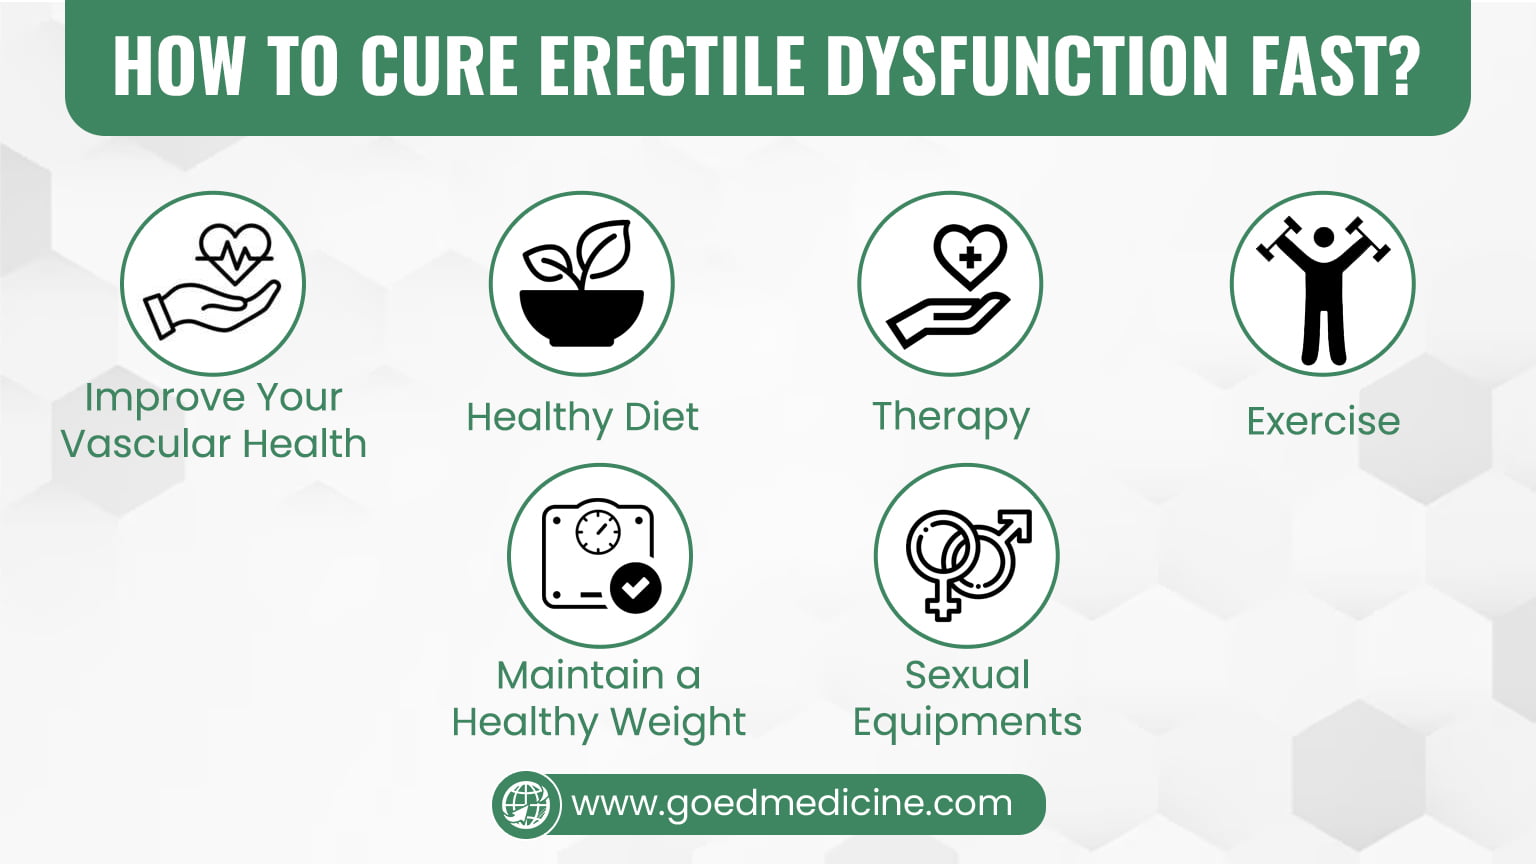 How to Cure Erectile Dysfunction Fast